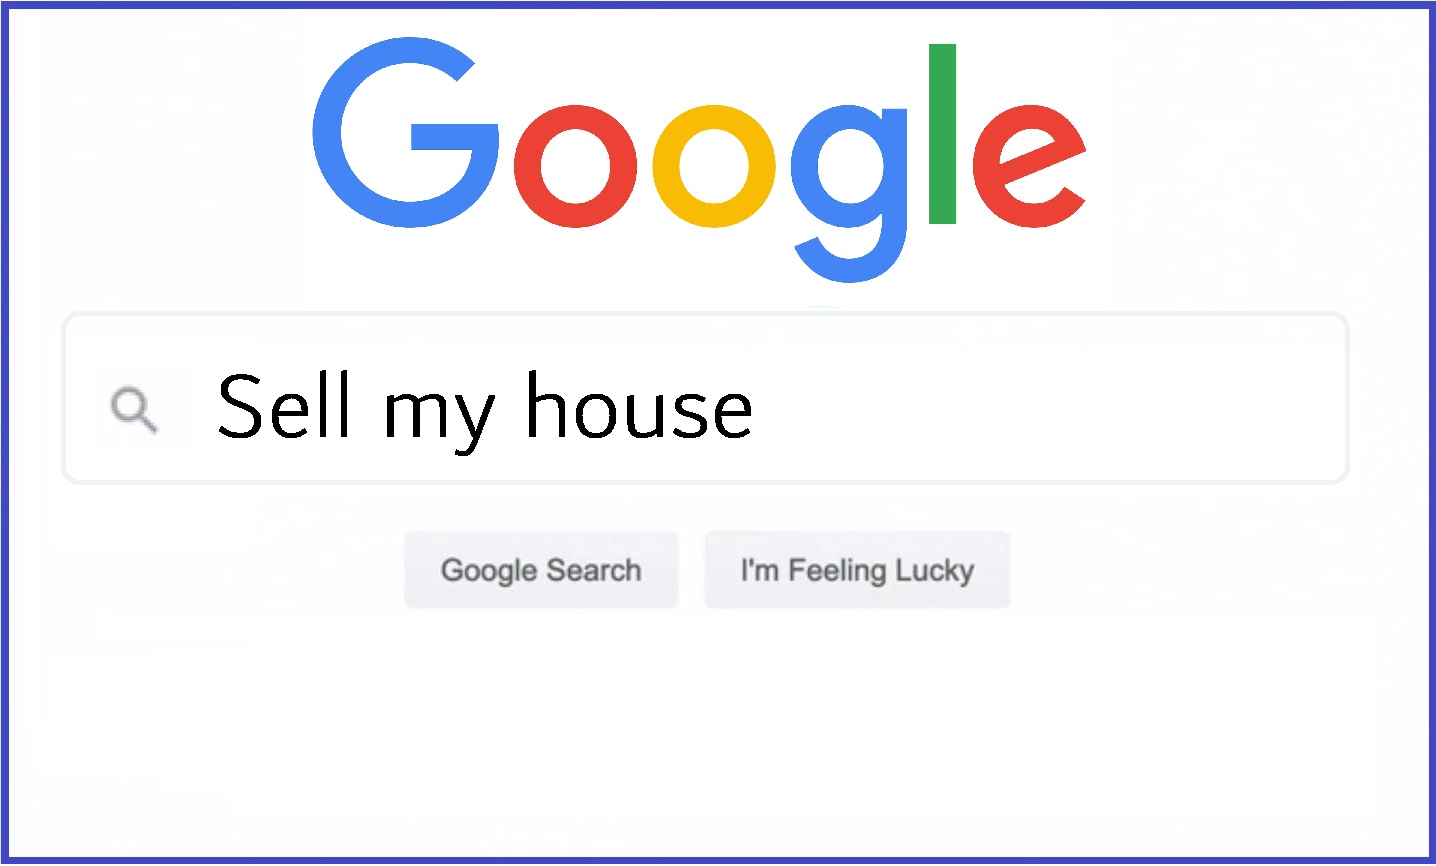 Why is “Selling My Home” a Hot Topic on Google?